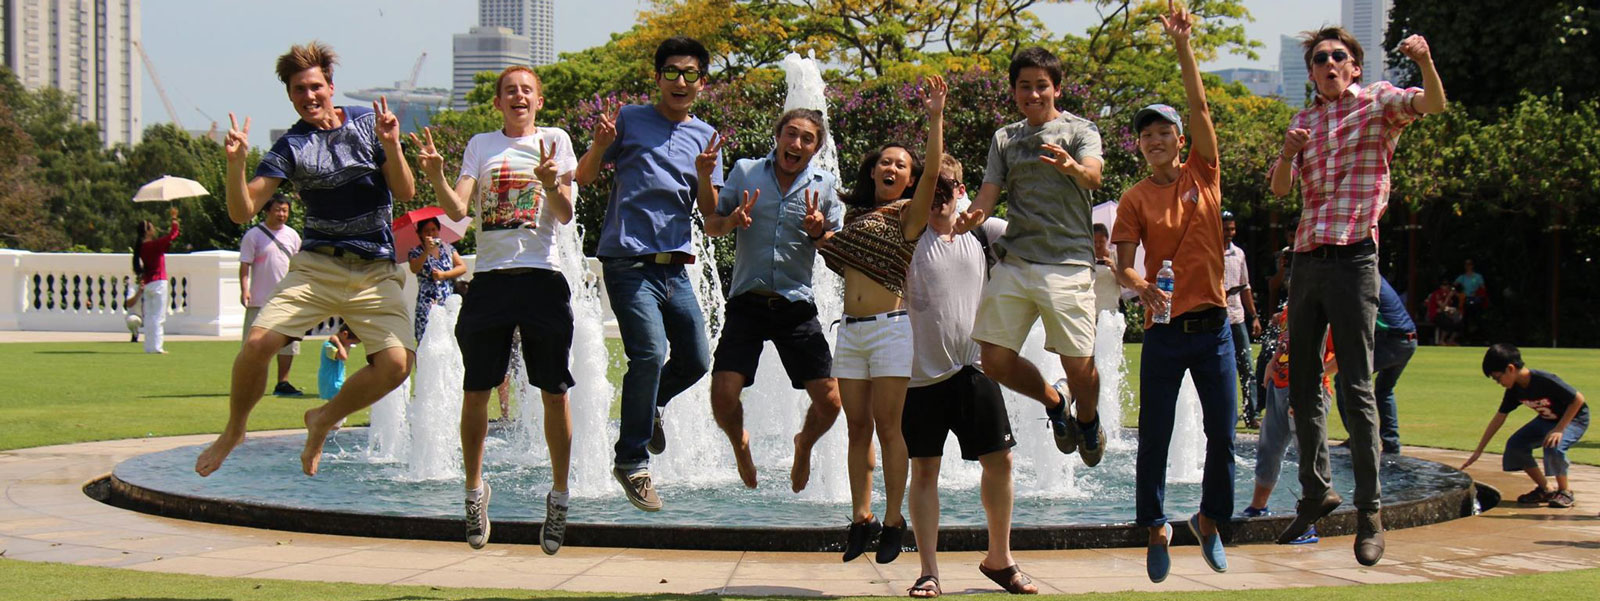 students jumping in front of fountain